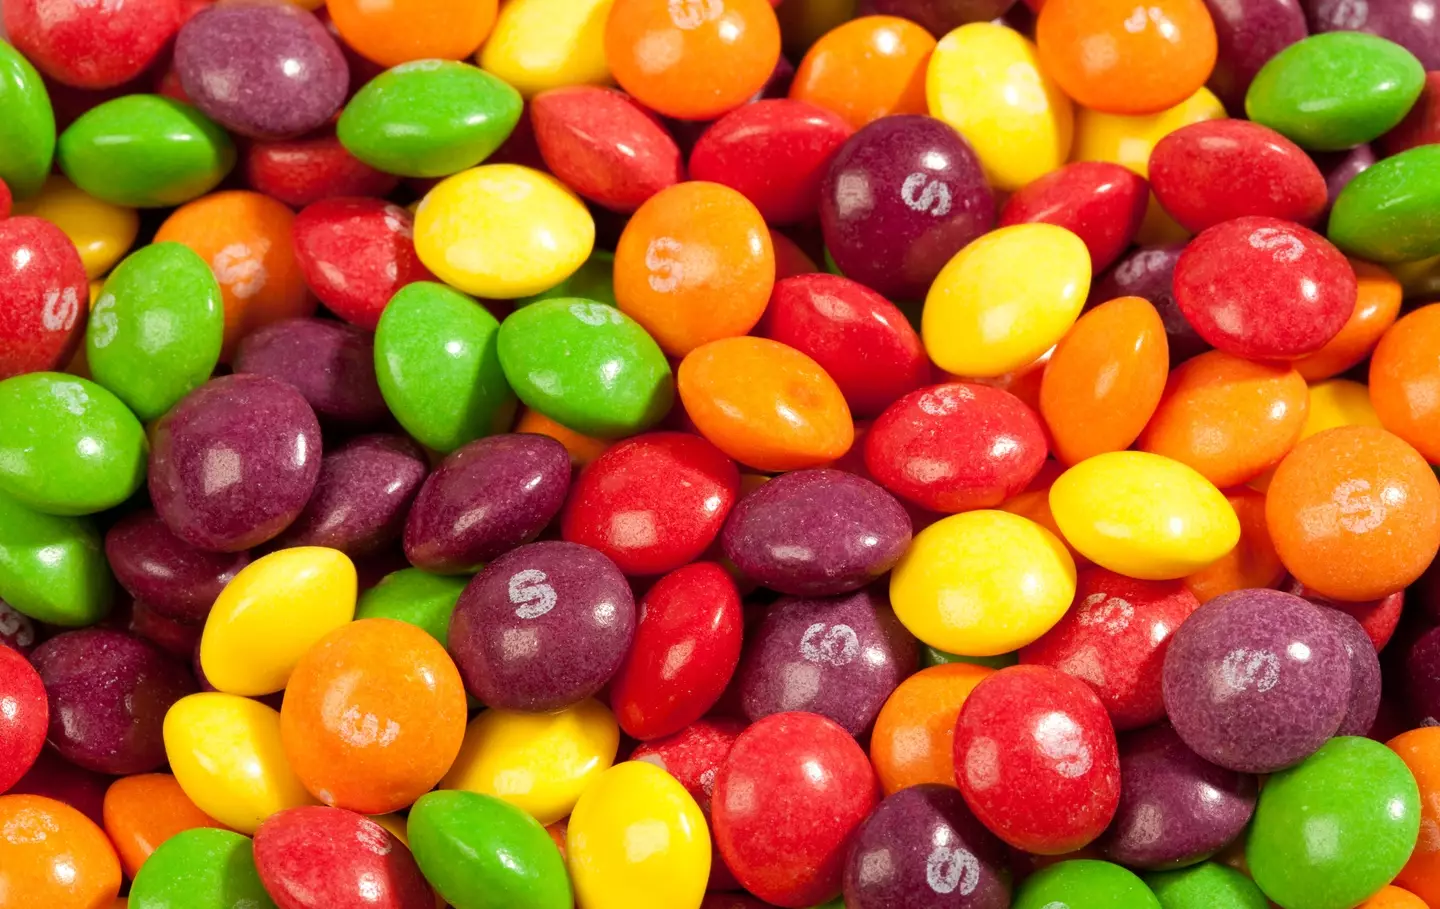 The drug has been placed in Skittles packaging before too.